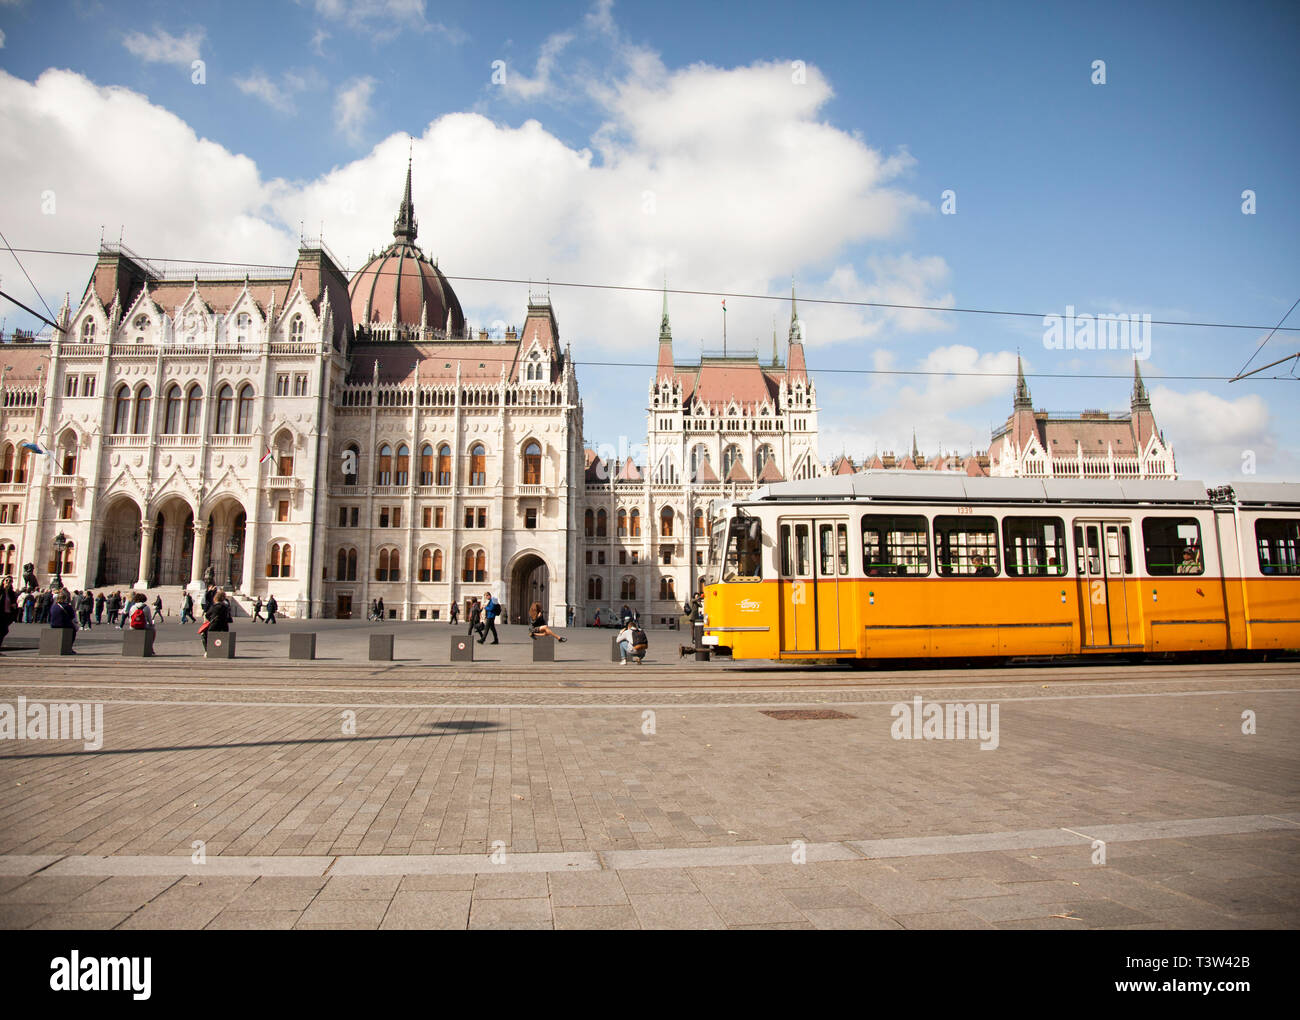 BUDAPEST, HUNGARY - SEPTEMBER 22, 2017: A public transit streetcar passes by the Hungarian Parliament buildings in Budapest. Stock Photo